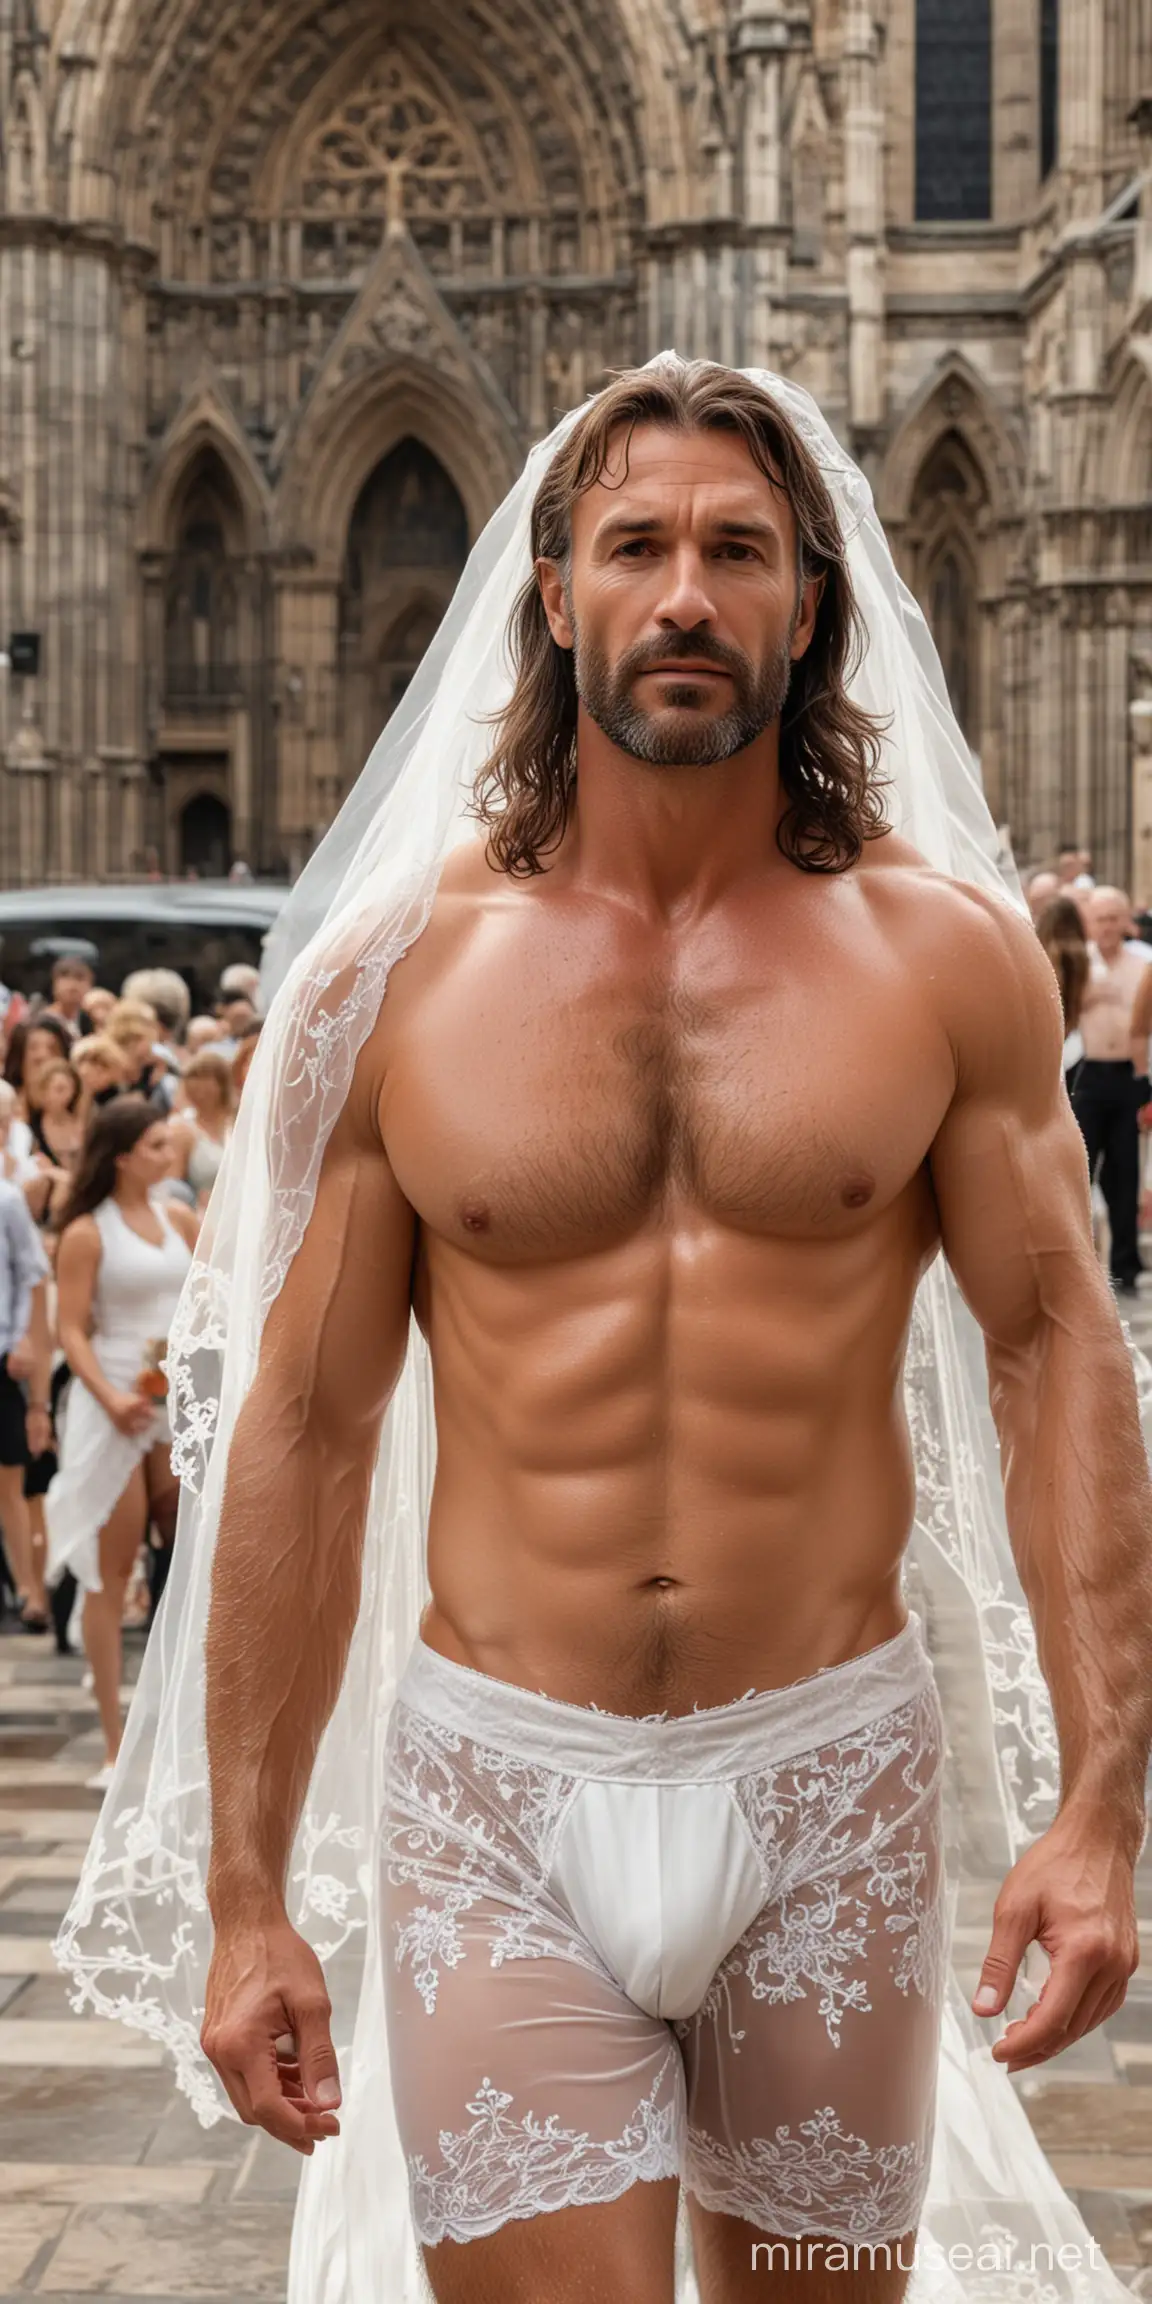 Sensual Groom Muscular Man in Lace Lingerie at Cathedral Aisle